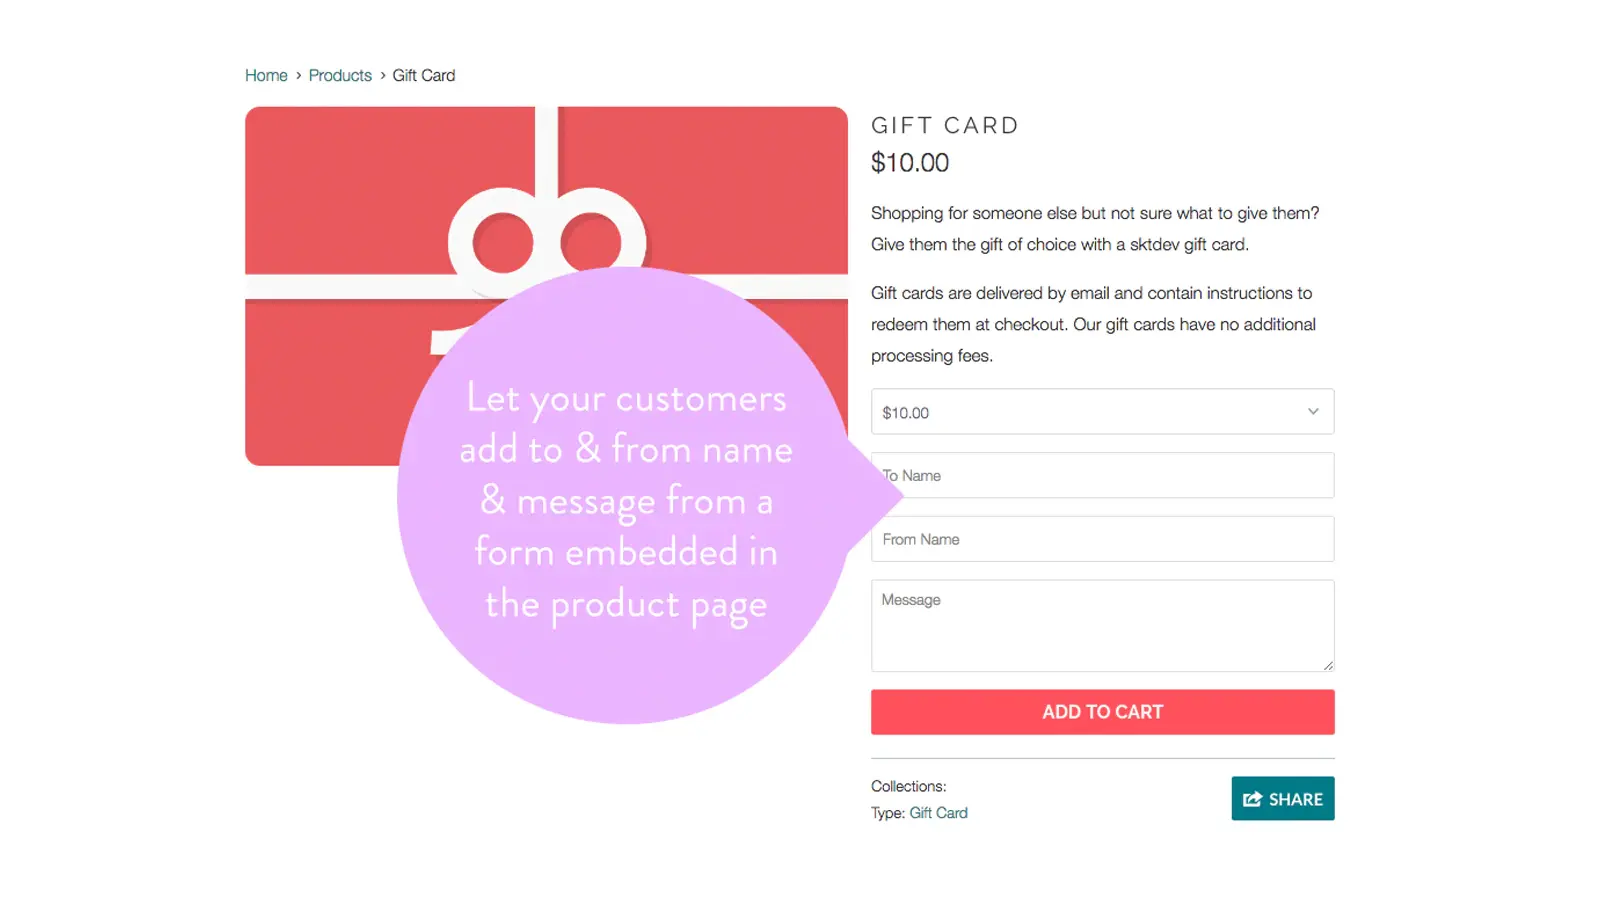 shopify-gift-card-apps-17